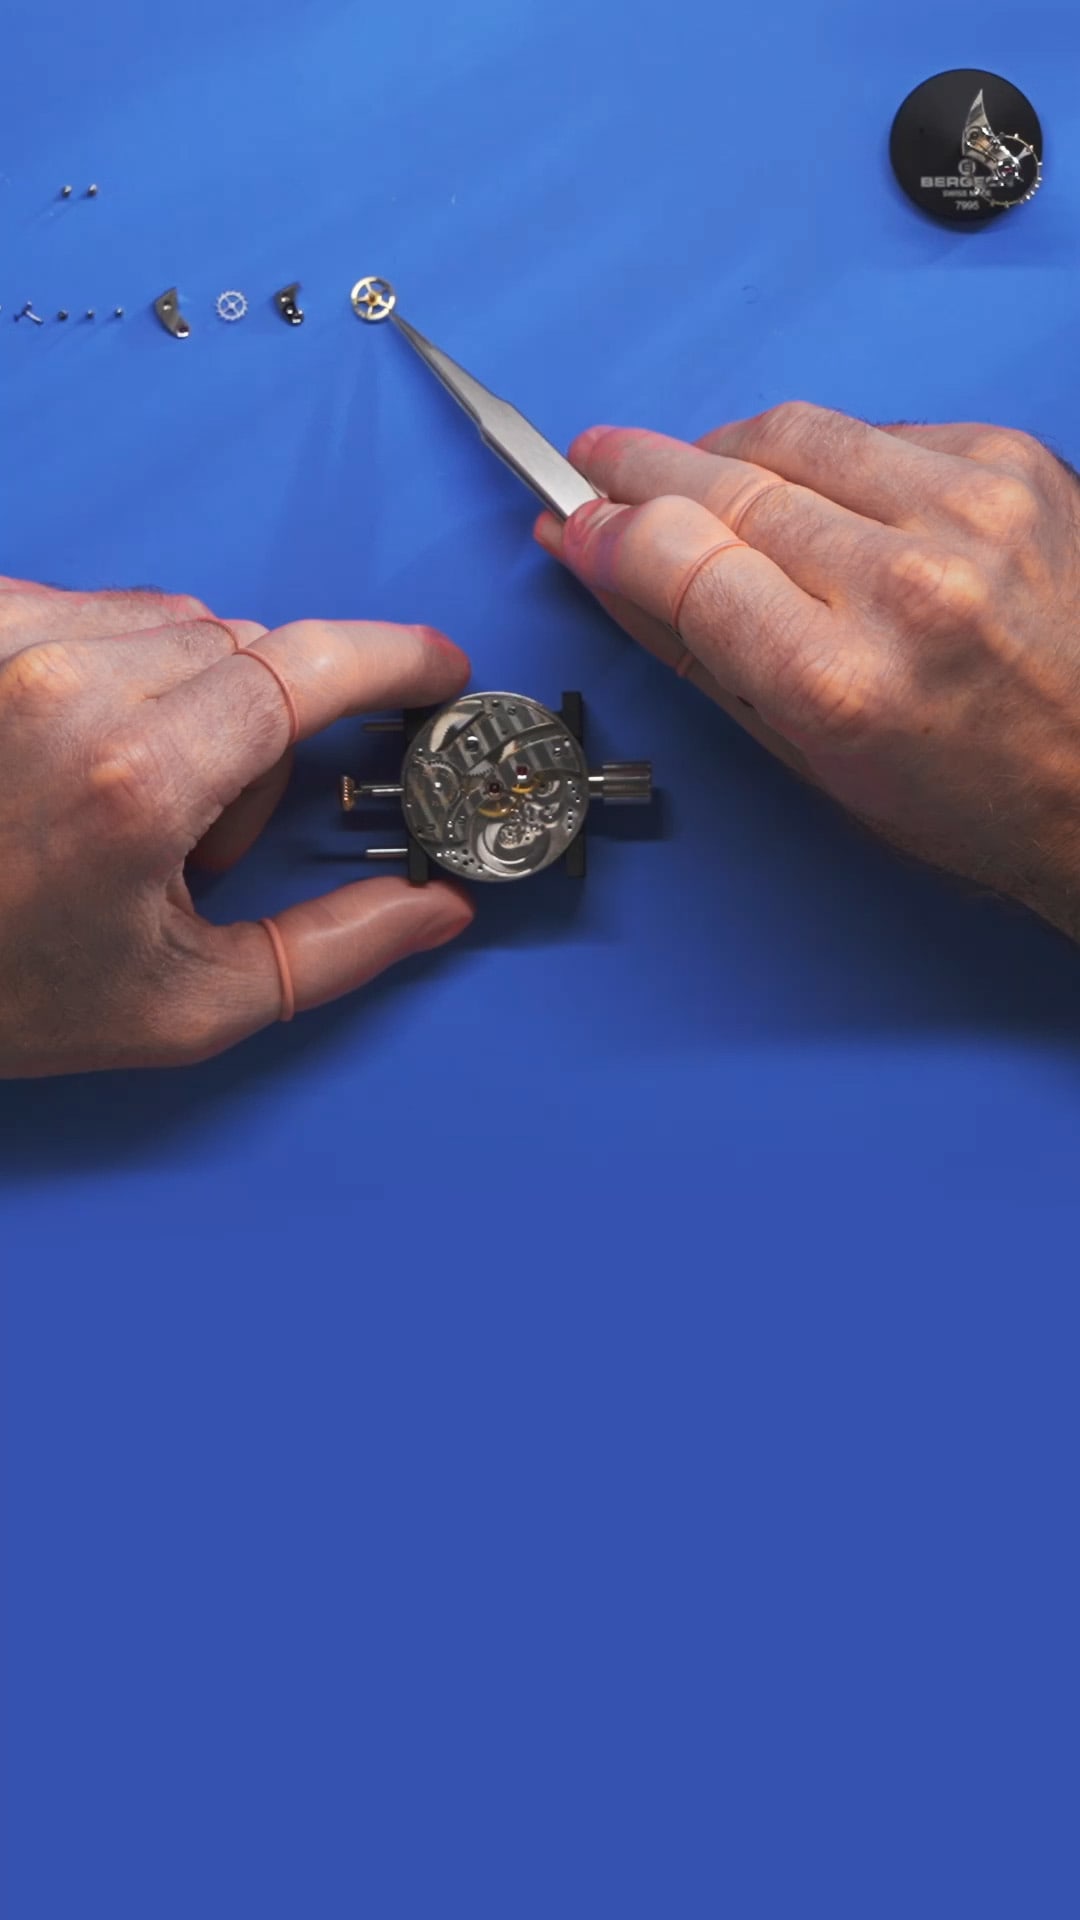 Illustration of Repair, restore, refurbish. Service your watch with us.